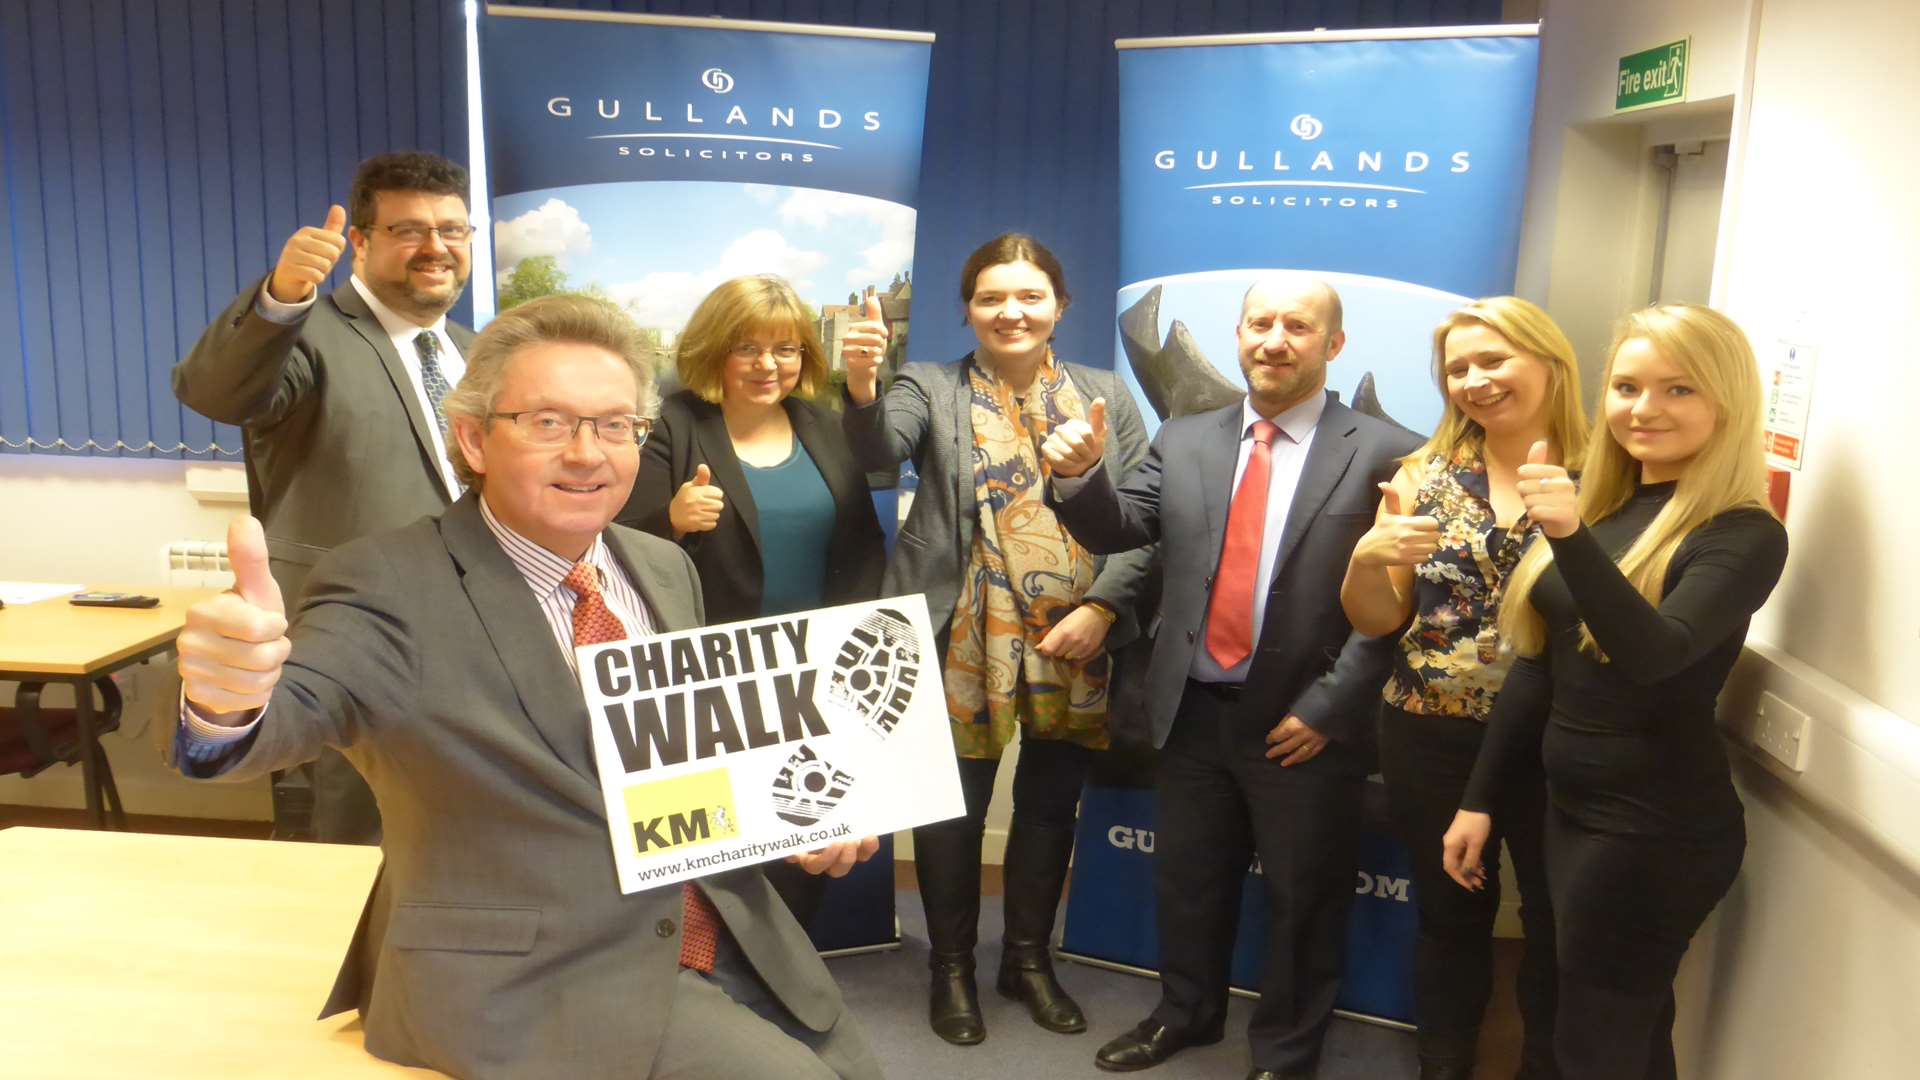 Blair Gulland and staff from Gullands announce support of the KM Charity Walk.